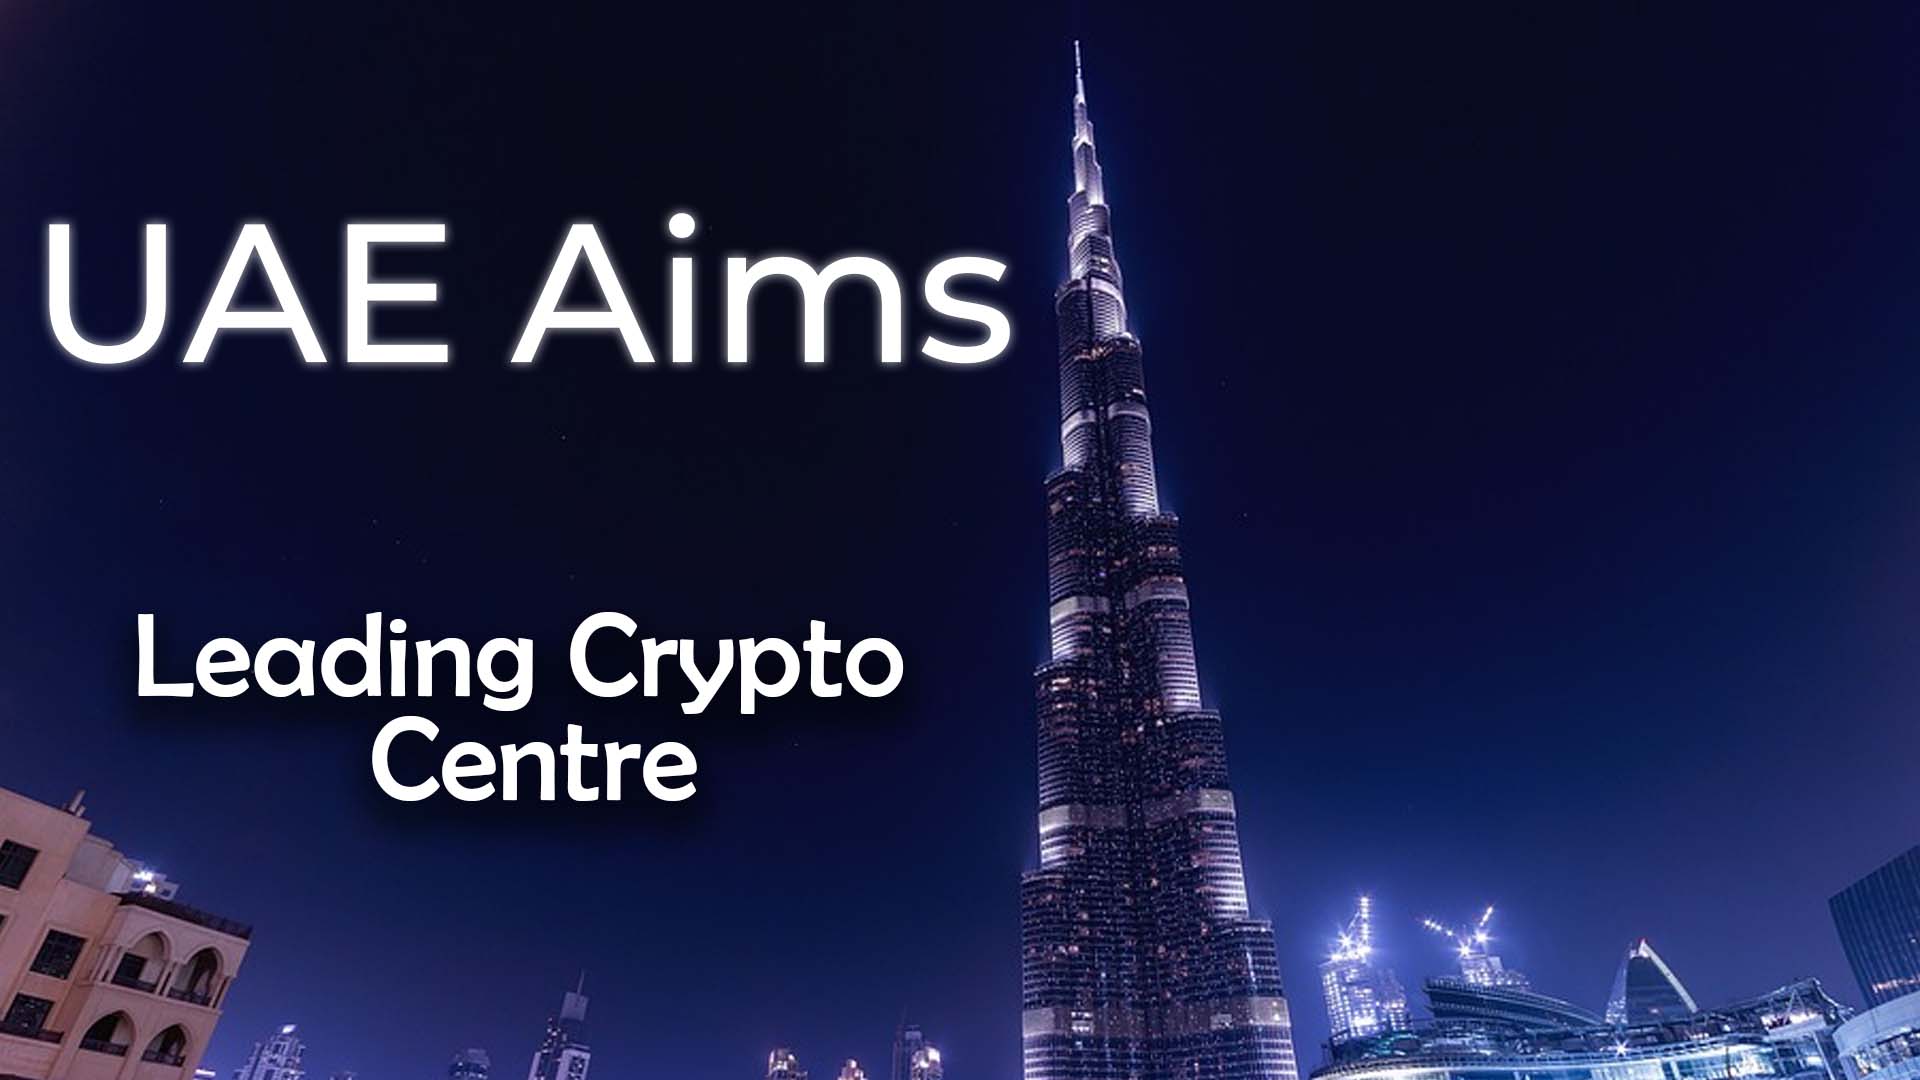 The UAE Aims At Establishing Itself As A Leading Crypto Centre